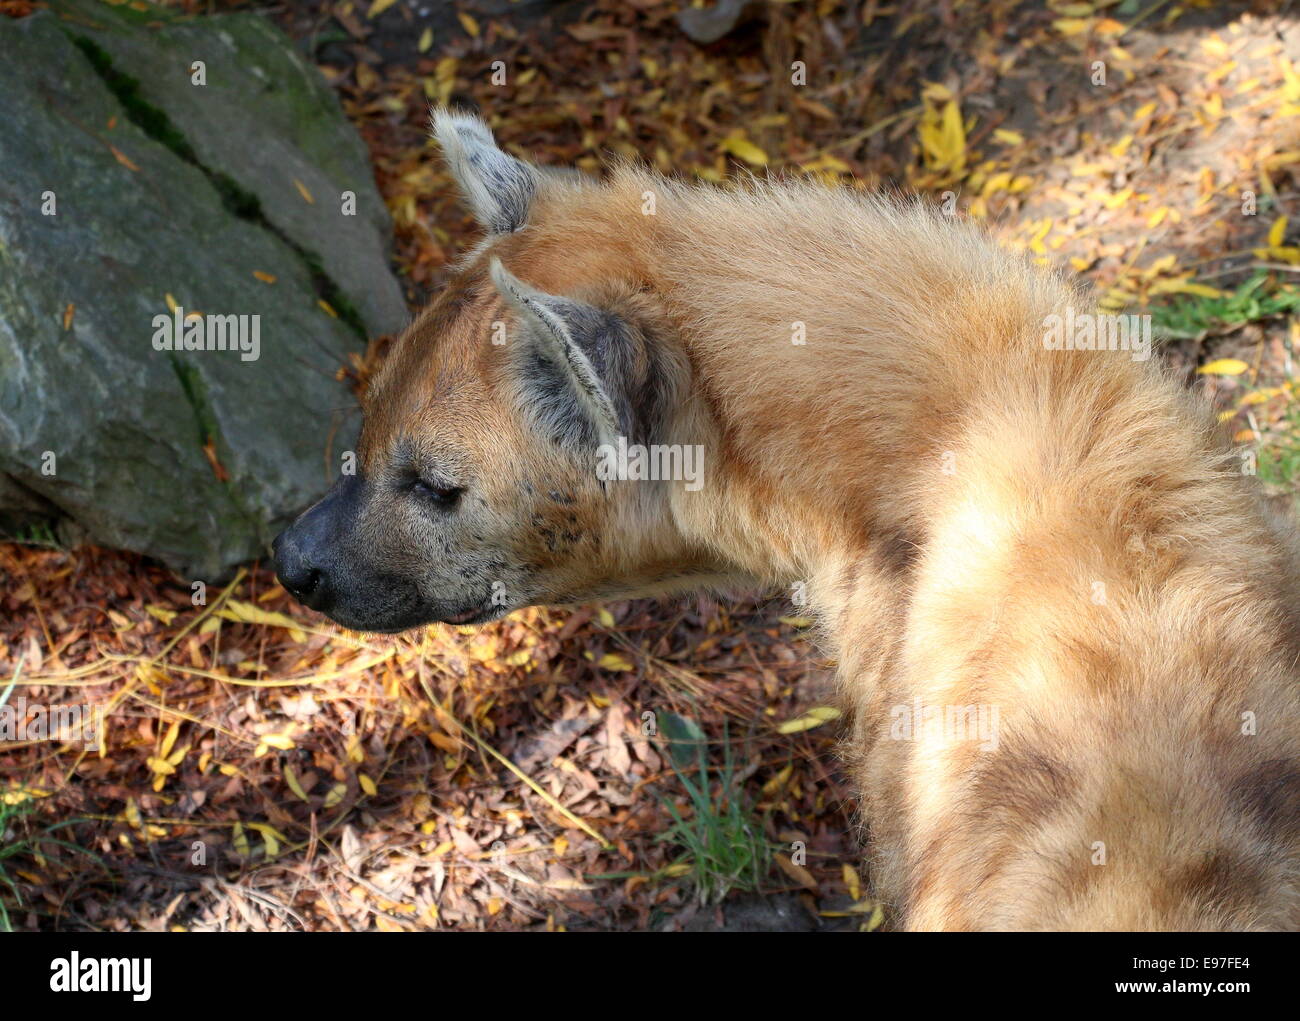 Mature African Spotted or laughing hyena in close-up Stock Photo